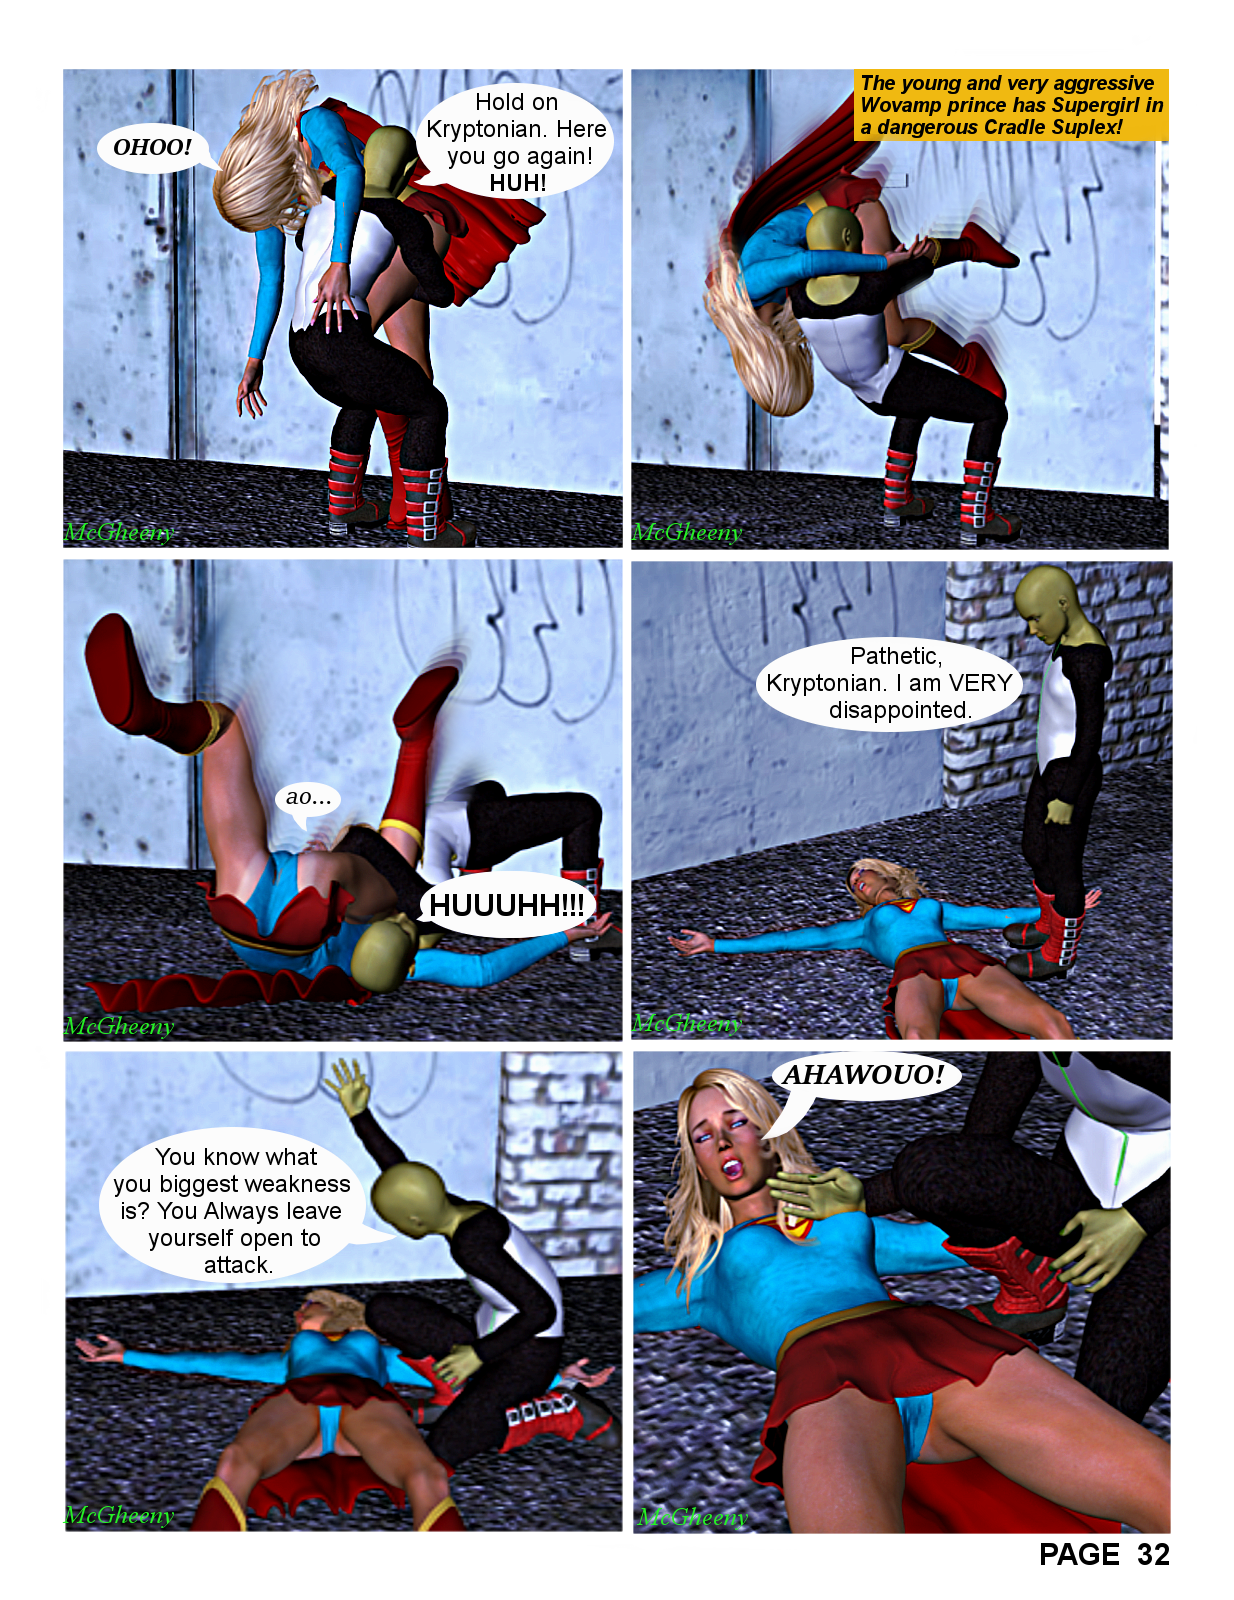 Supergirl in Banors Prize Page 32.png